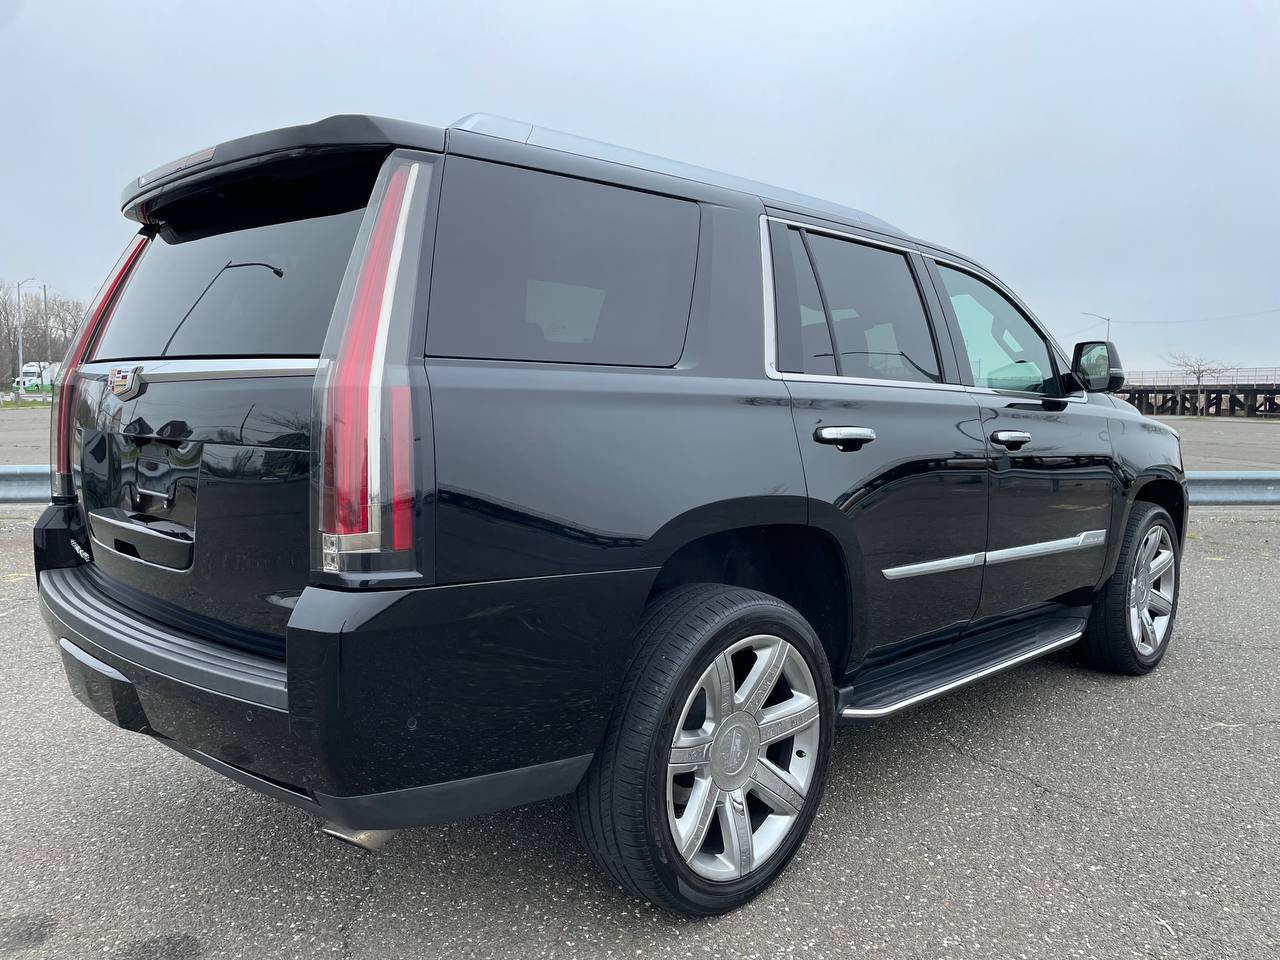 Used - Cadillac Escalade SUV for sale in Staten Island NY